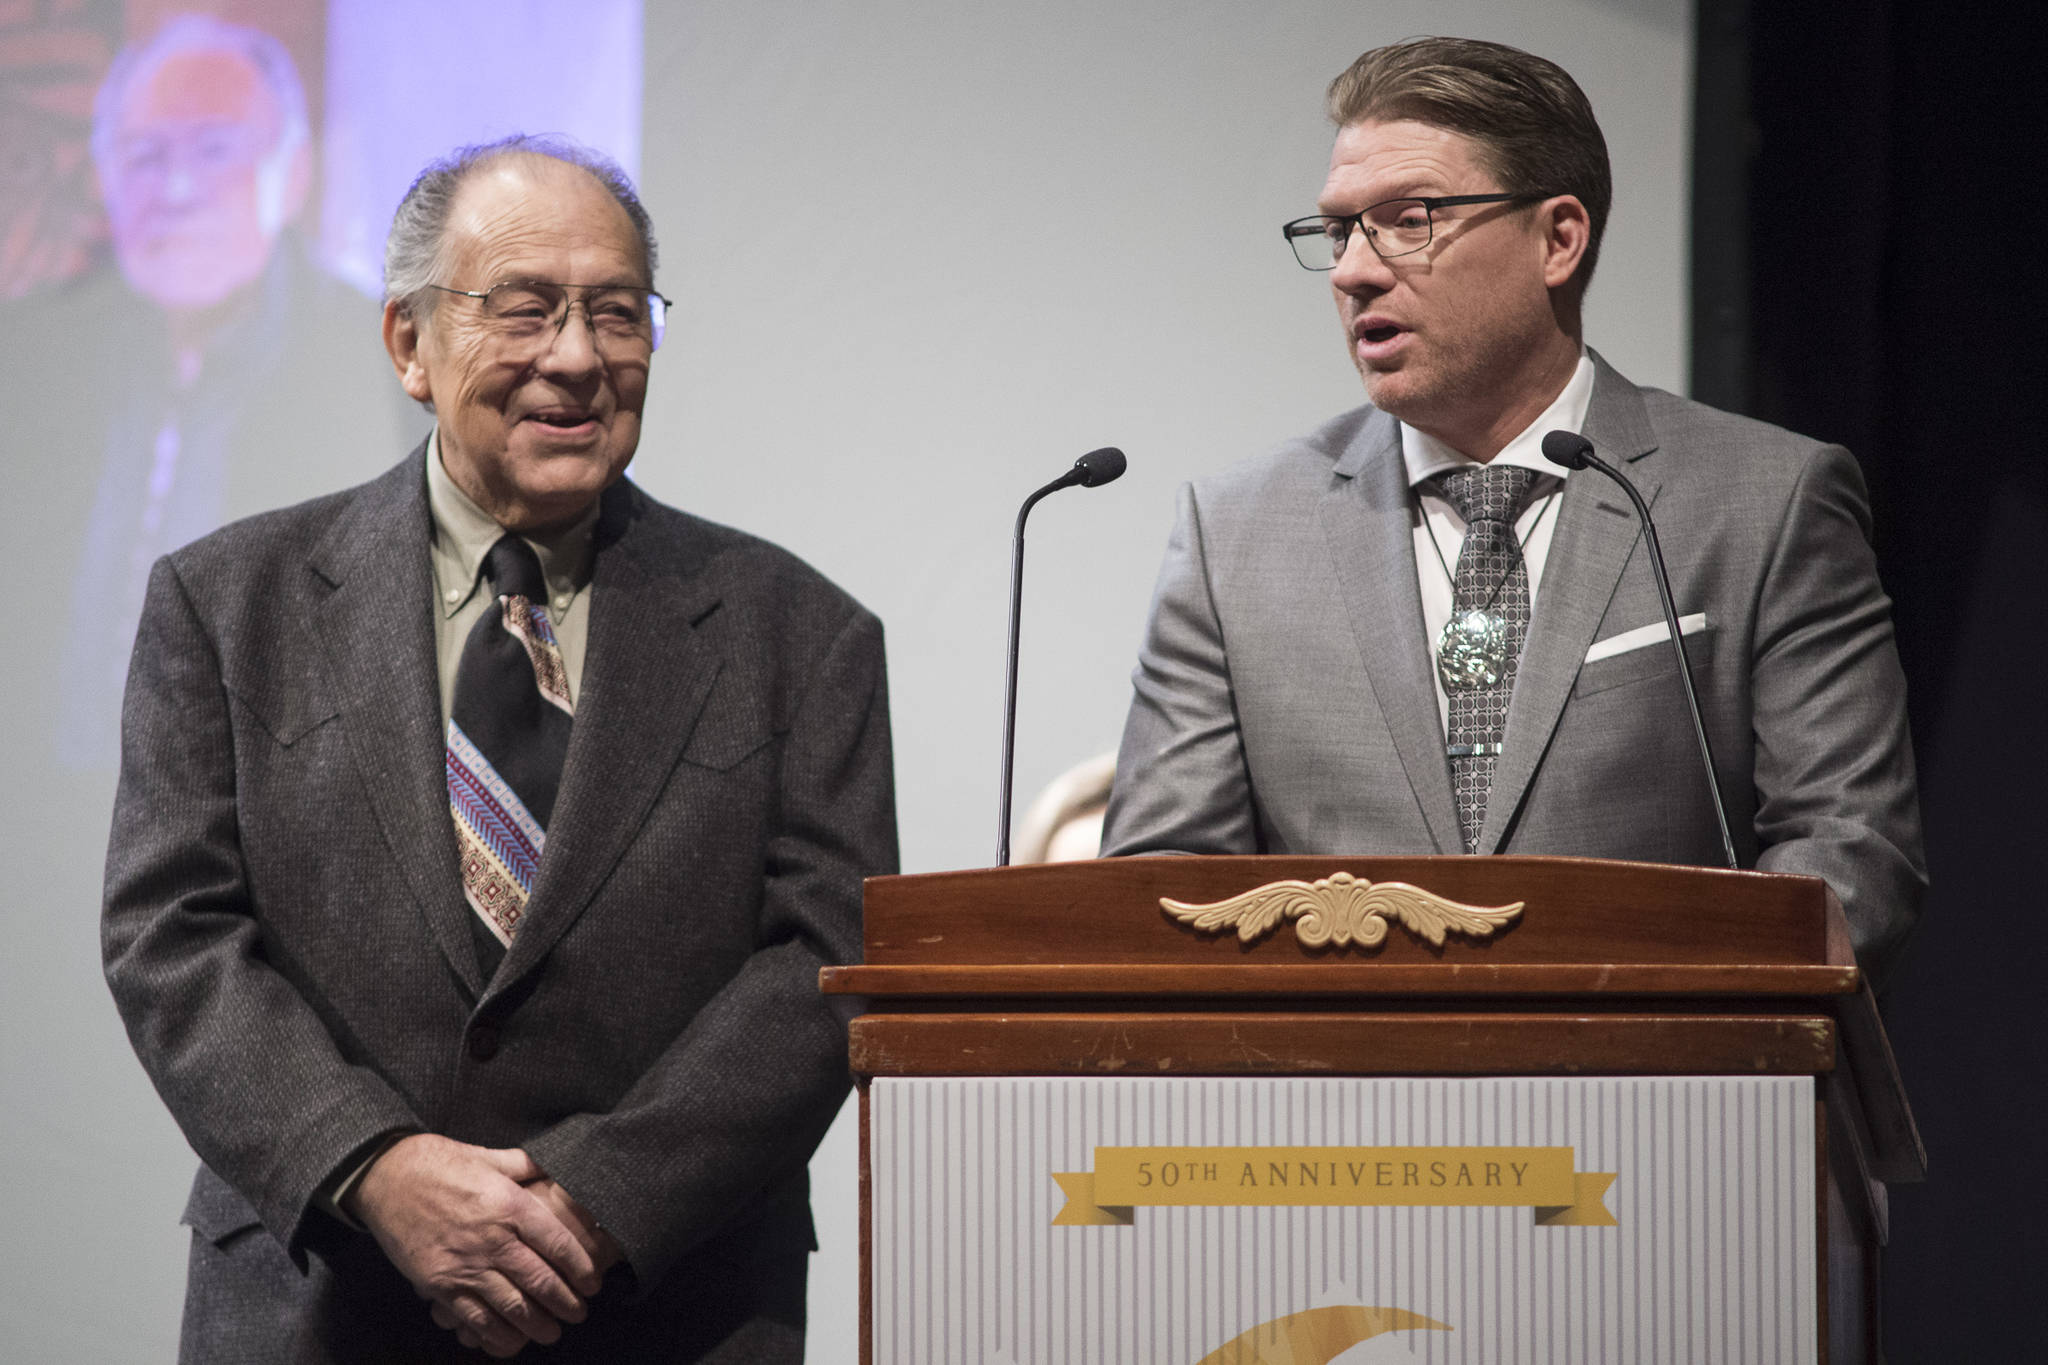 Jack Hudson, left, and his son, John Hudson III, of Metlakatla, give their thank you speech after winning the Alaska Native Arts Award at the 2019 Governor’s Arts and Humanities Awards at the Juneau Arts & Culture Center on Thursday, Feb. 7, 2019. (Michael Penn | Juneau Empire)